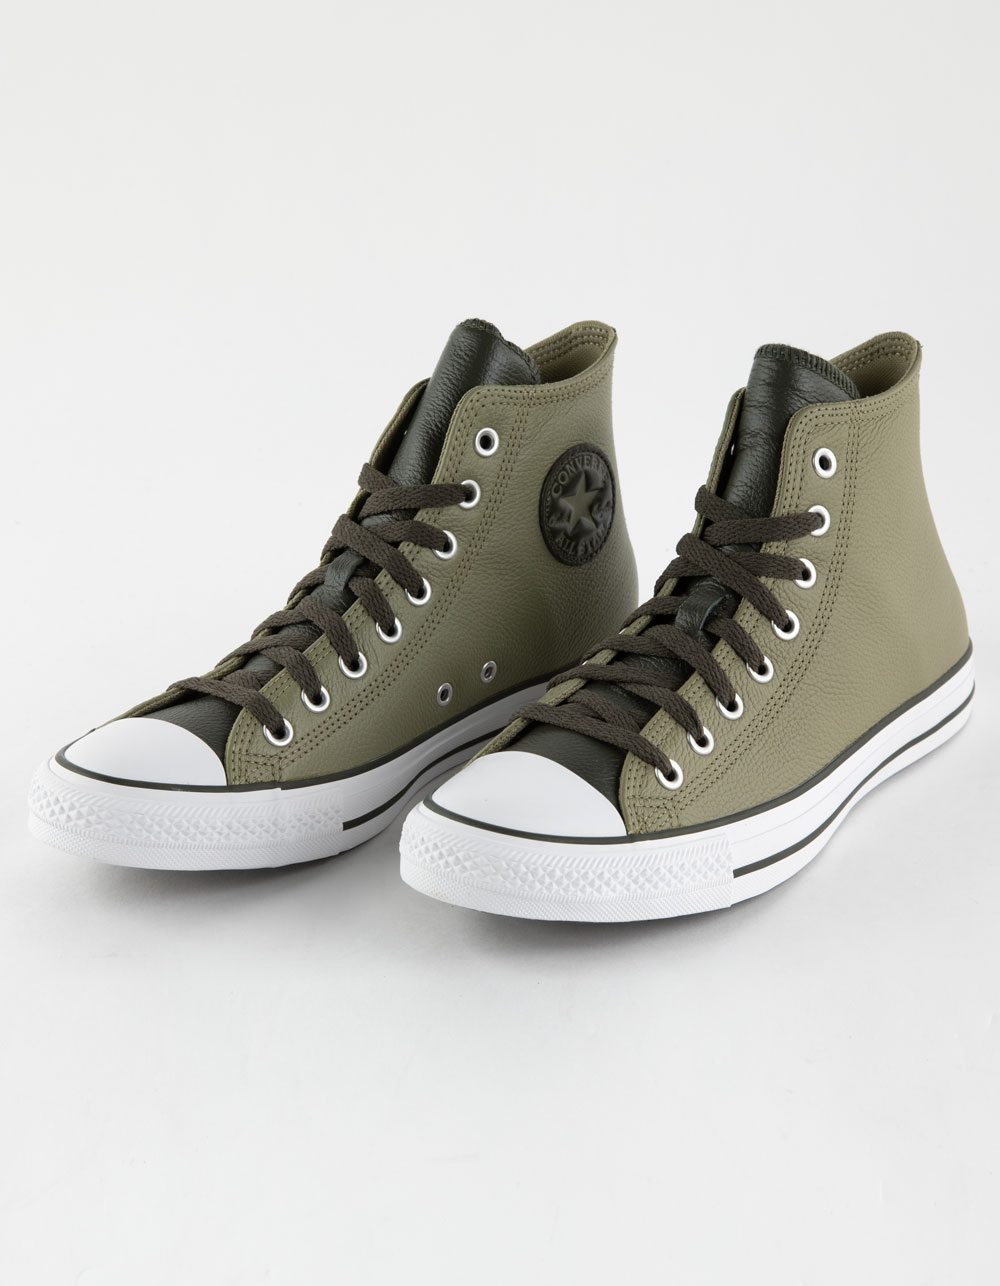 CONVERSE Chuck Taylor All Star Leather High Top Shoes